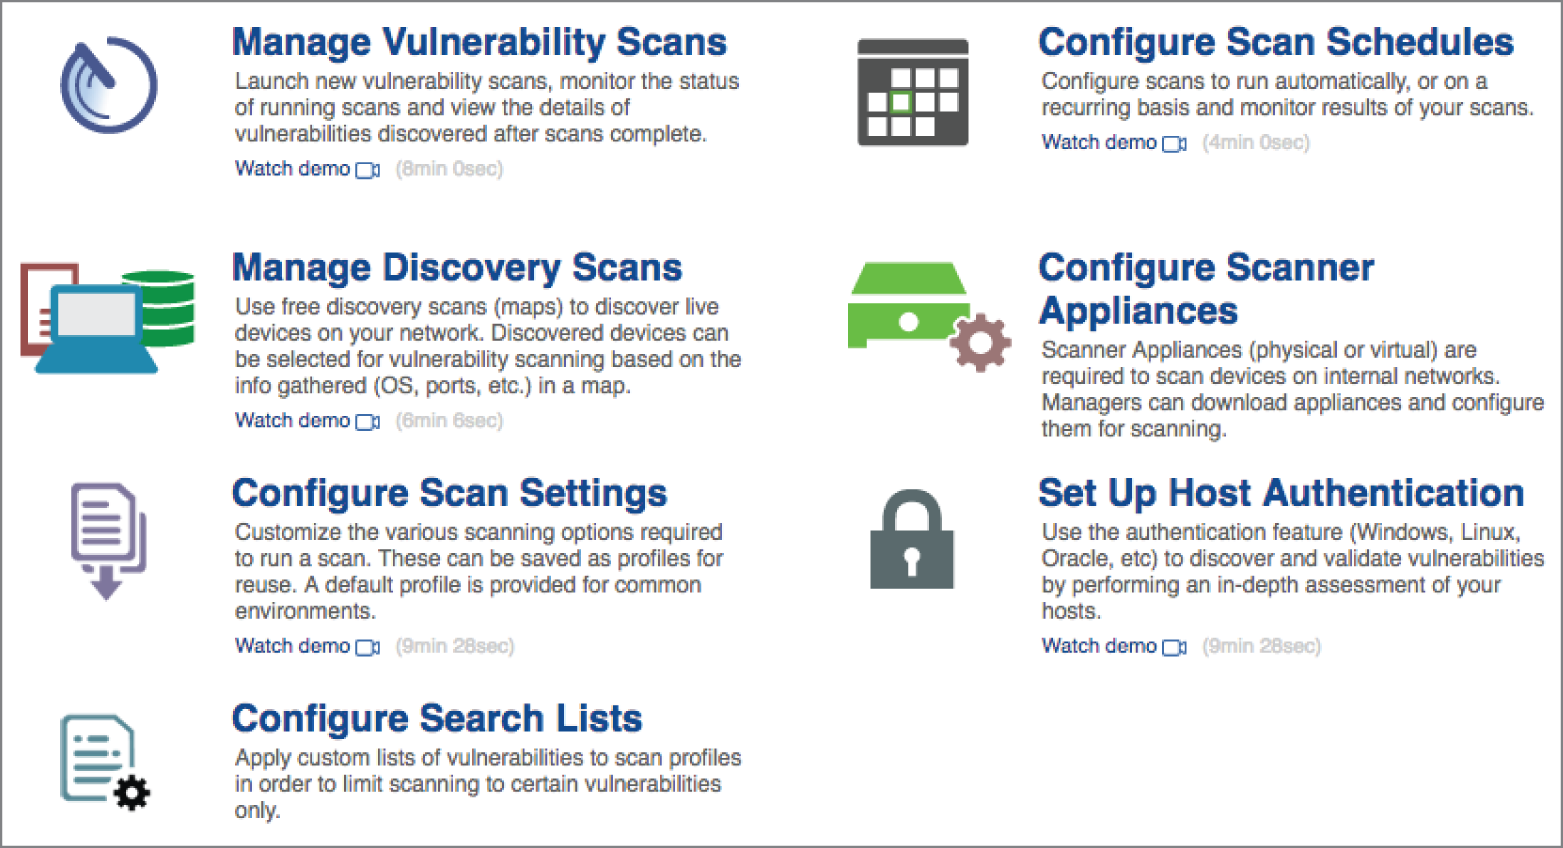 A window page depicts the manage vulnerability scans, manage discovery scans, configure scan settings, configure search lists, configure scan schedules, configure scanner appliances, and setup host authentication options.